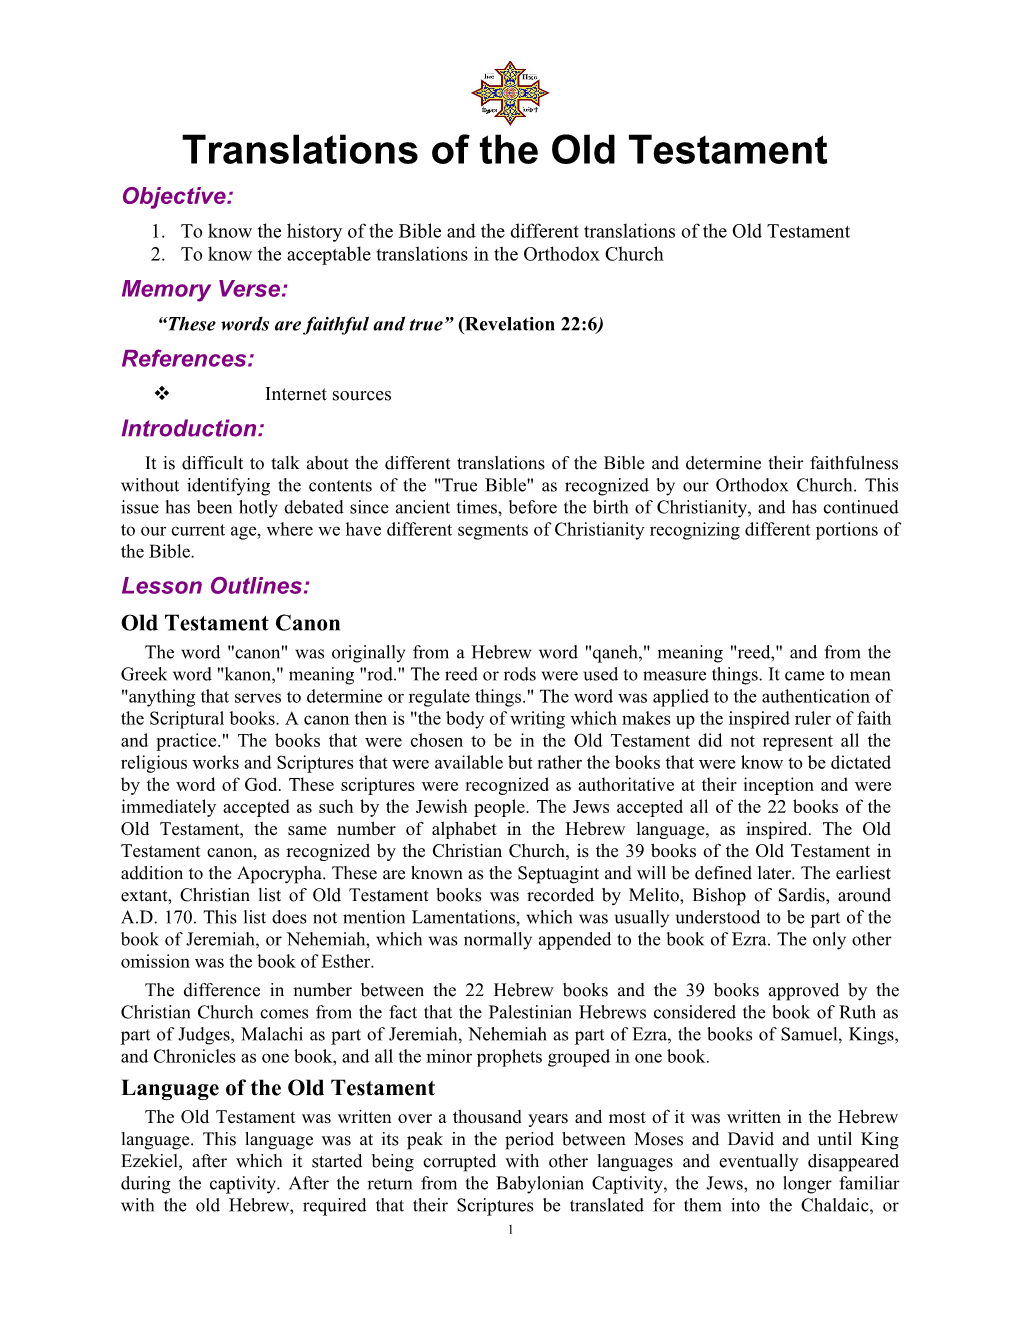 Tanslations of the Old Testament